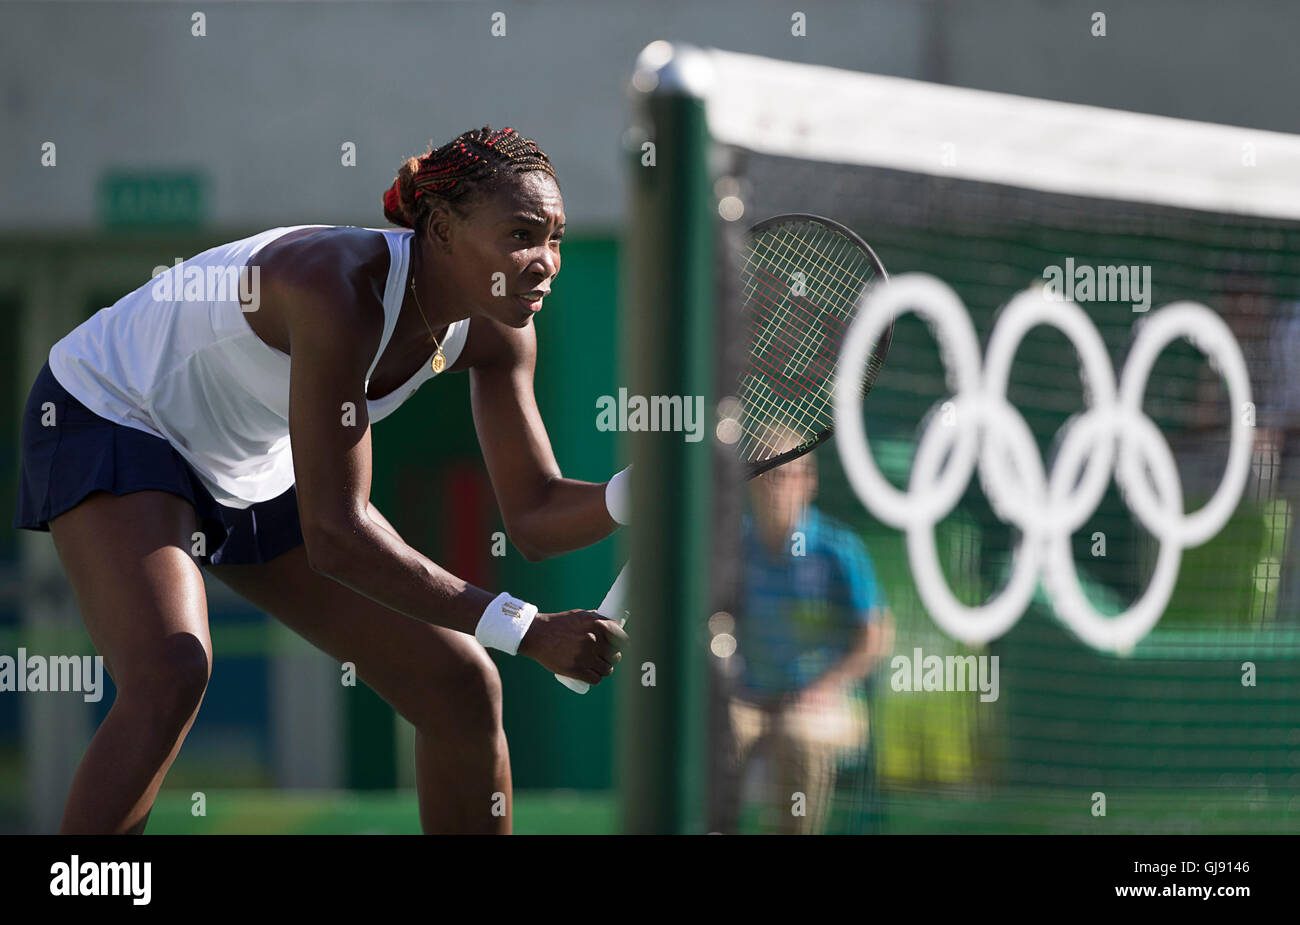 Rio de Janeiro, RJ, Brazil. 14th Aug, 2016. OLYMPICS TENNIS: Venus Williams (USA) waits for serve from Bethanie Mattek-Sands (USA) Women's Mixed Doubles Tennis final at Olympic Tennis Center during the 2016 Rio Summer Olympics games. Credit:  Paul Kitagaki Jr./ZUMA Wire/Alamy Live News Stock Photo